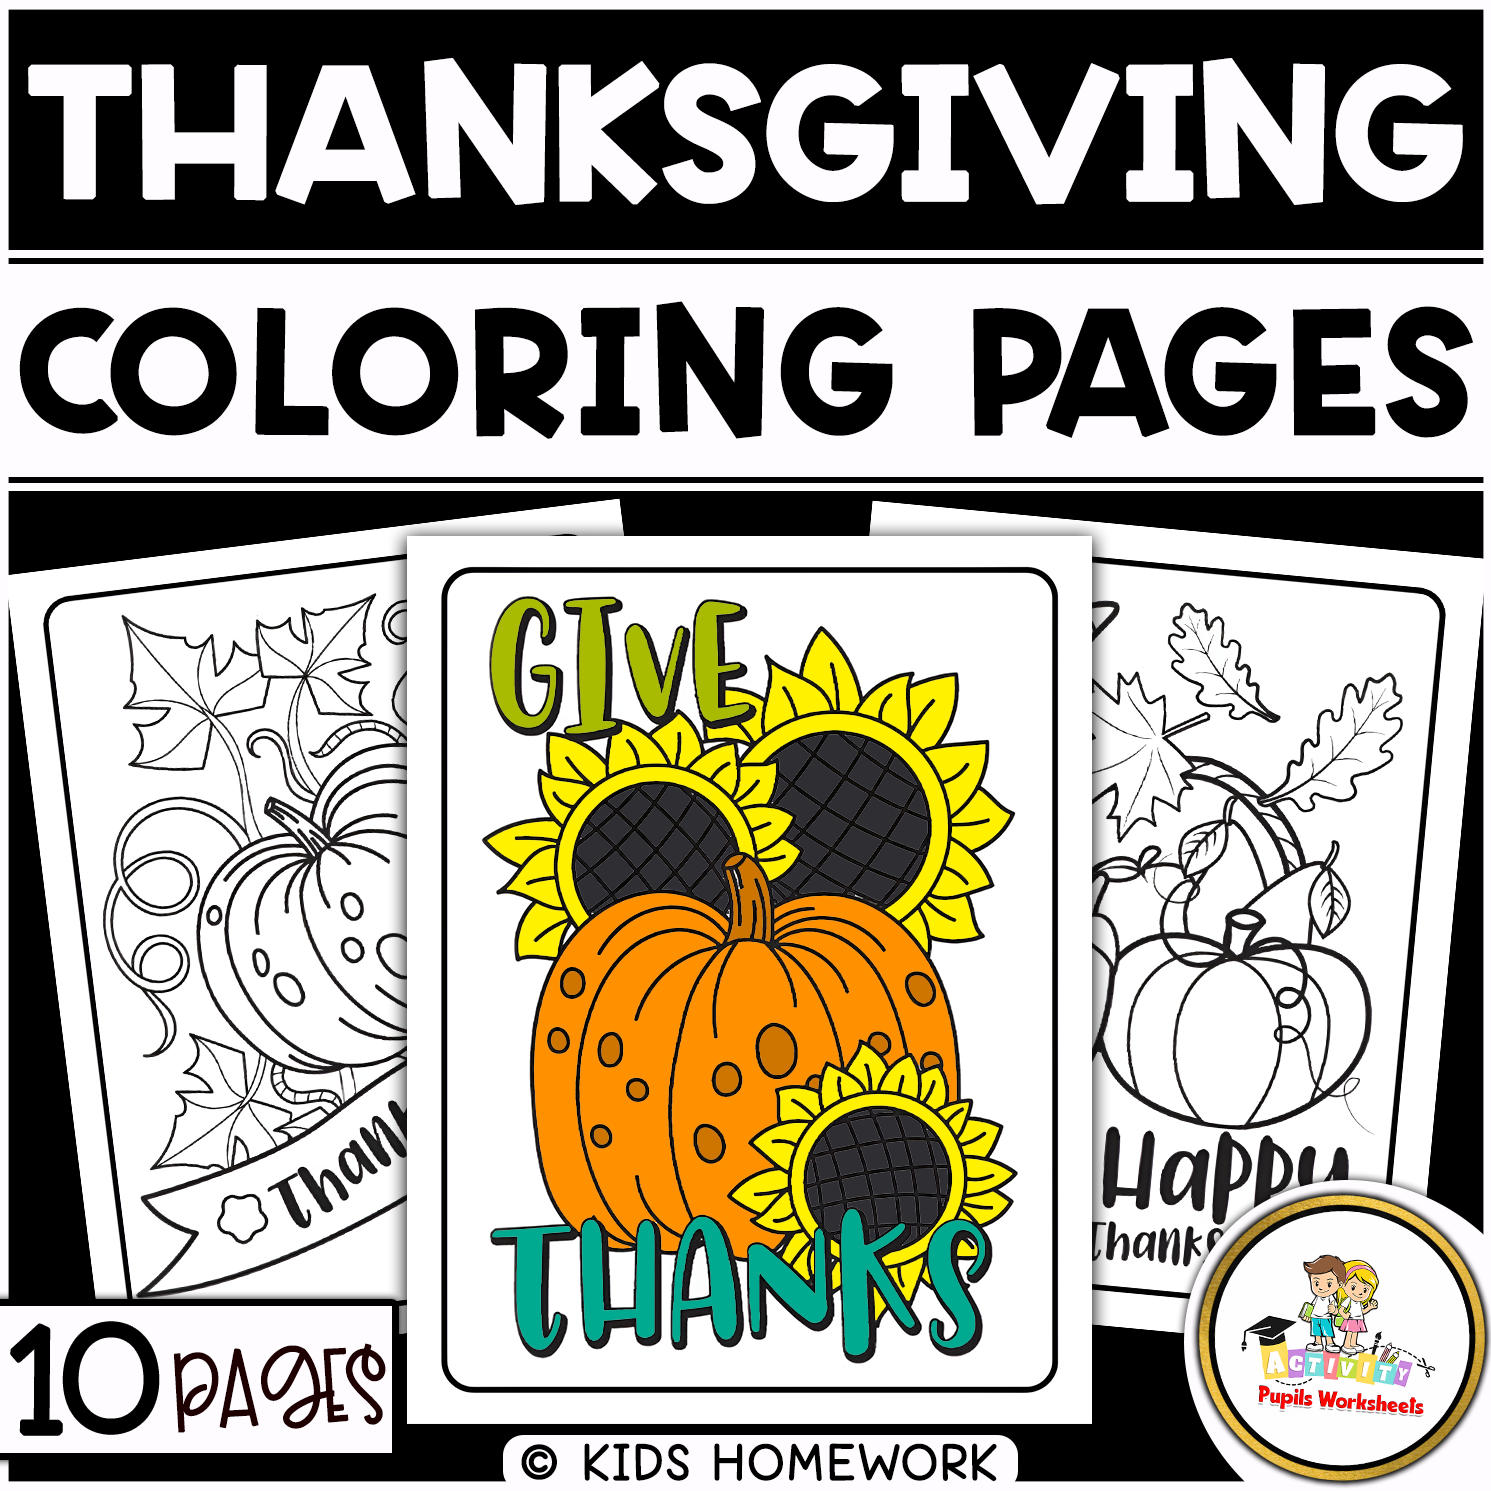 Thanksgiving coloring pages i fun thanksgiving turkey coloring sheets made by teachers